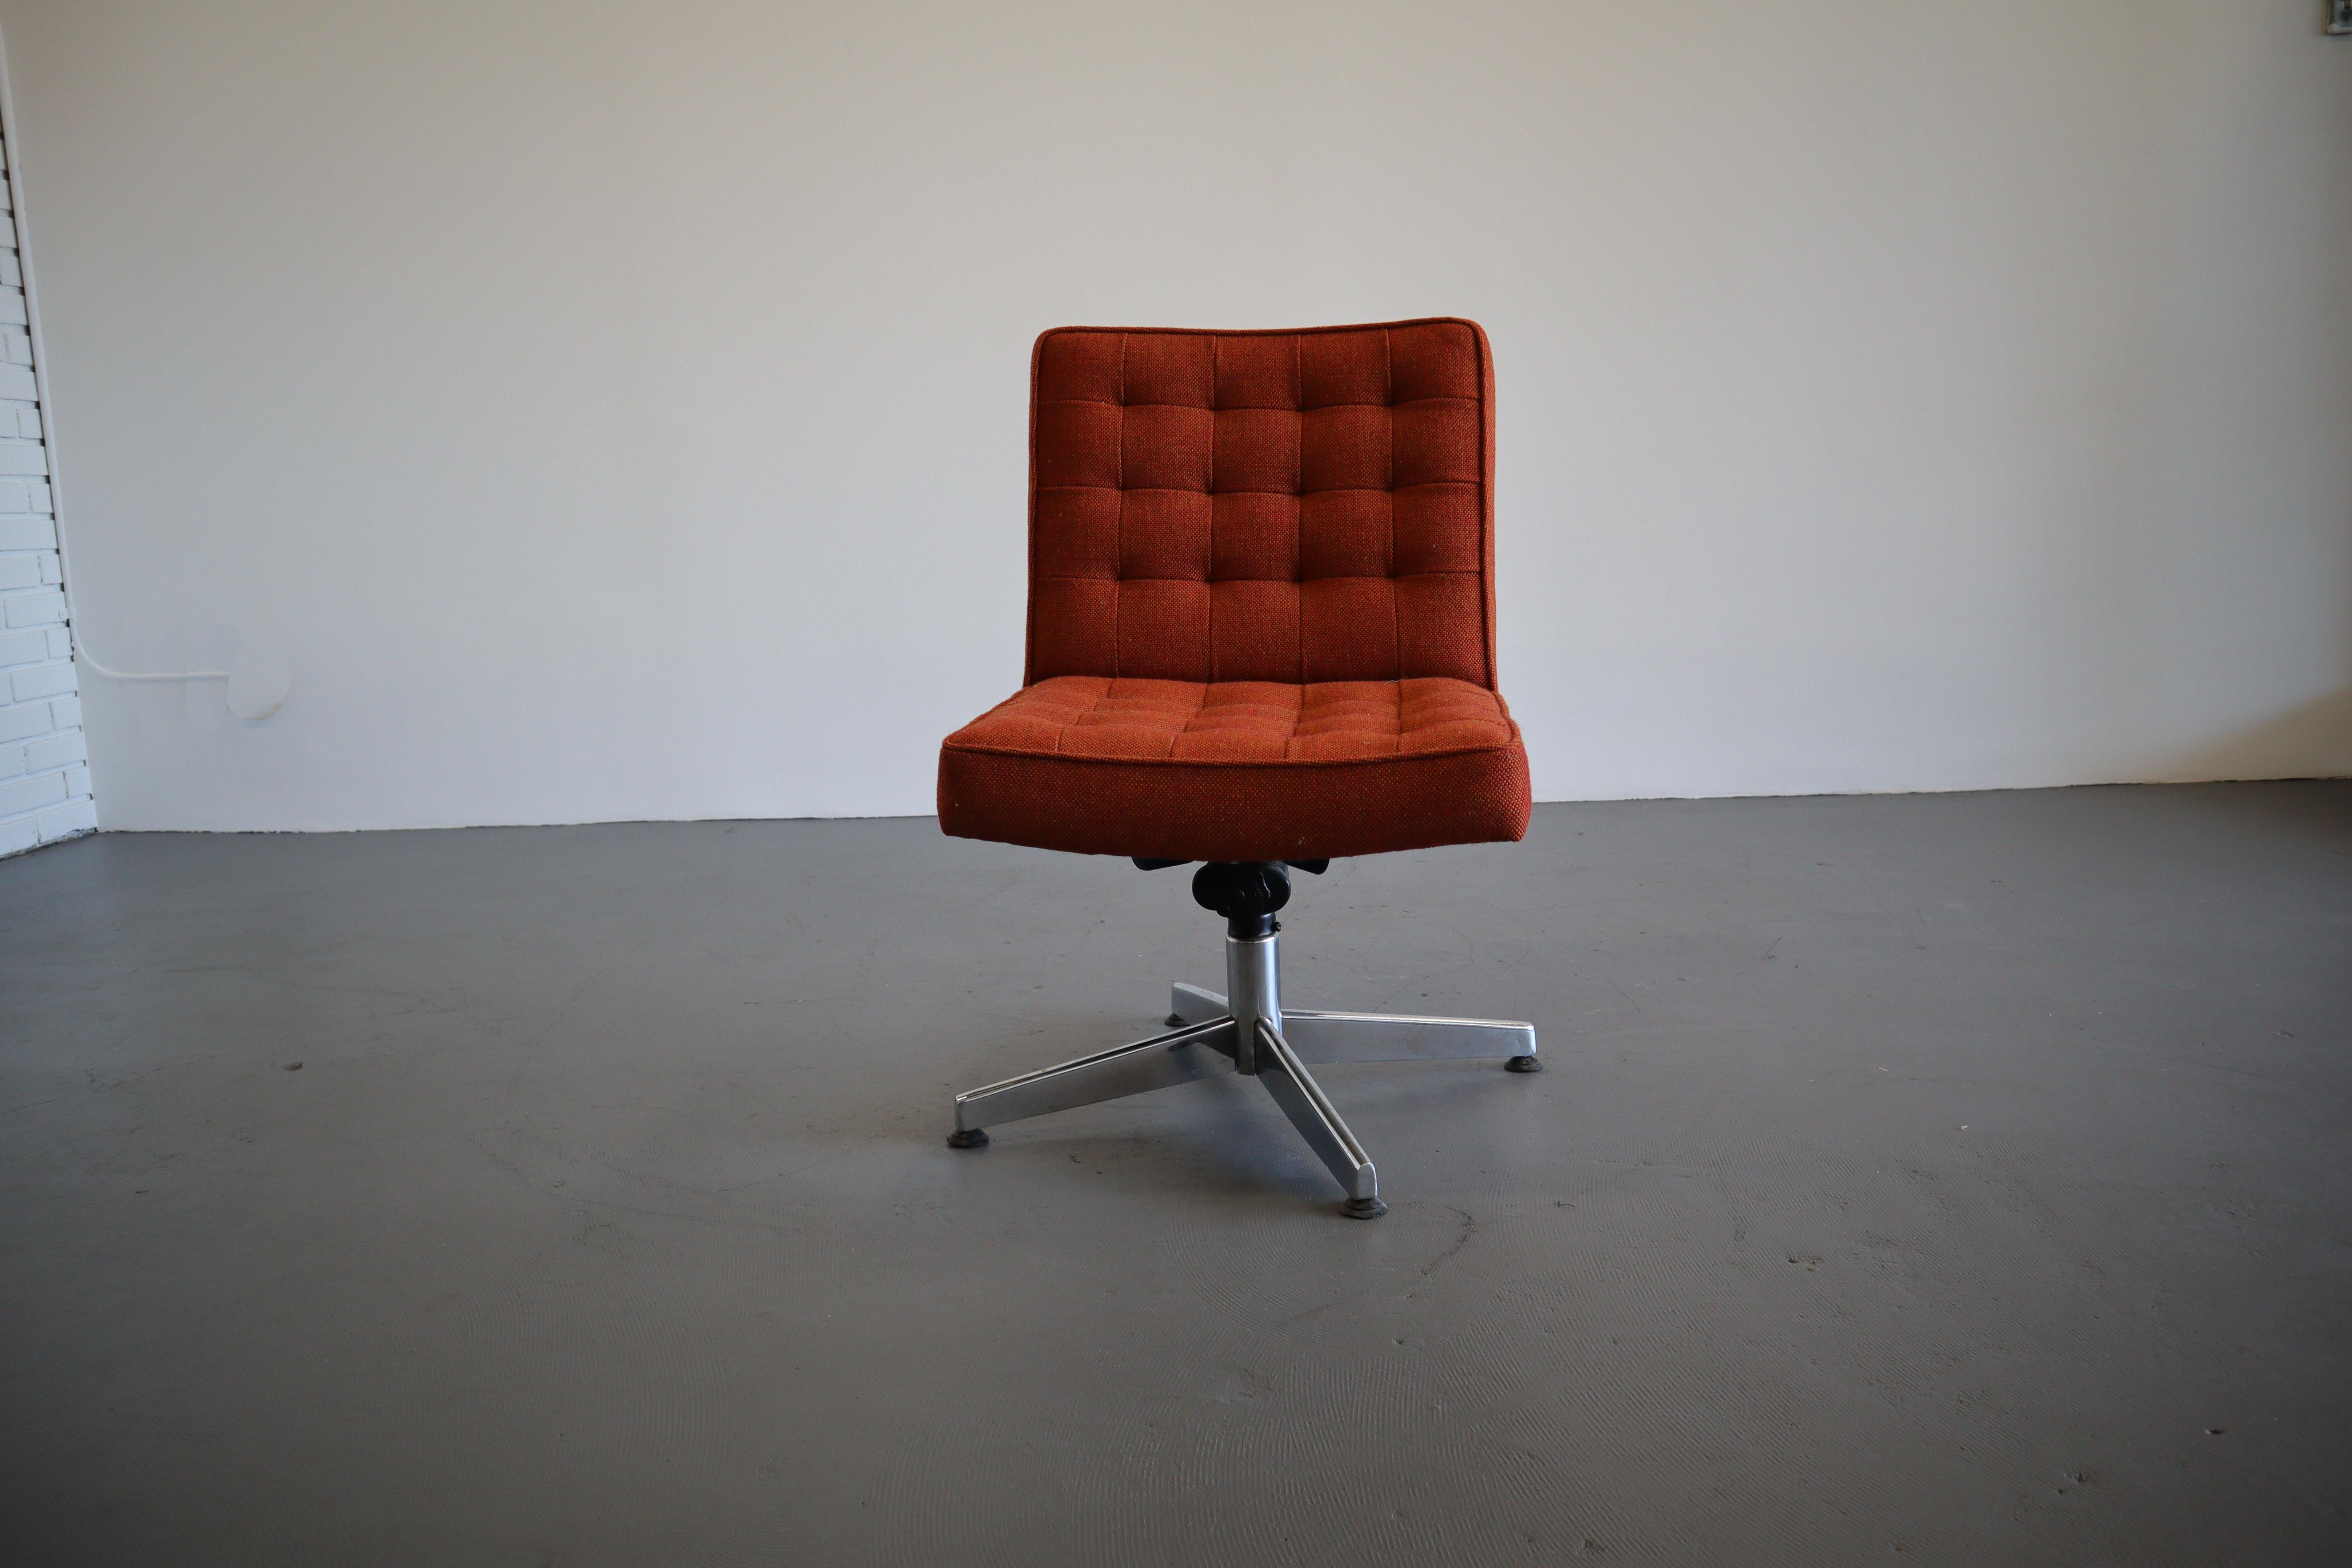 Brilliant amber color desk chair designed by Vincent Cafiero for Knoll. Clean lines, distinct tufted back, and four star base remains a classic design. Upholstery is a high performance Herman Miller fabric, simplistic and timeless Milnilo pattern